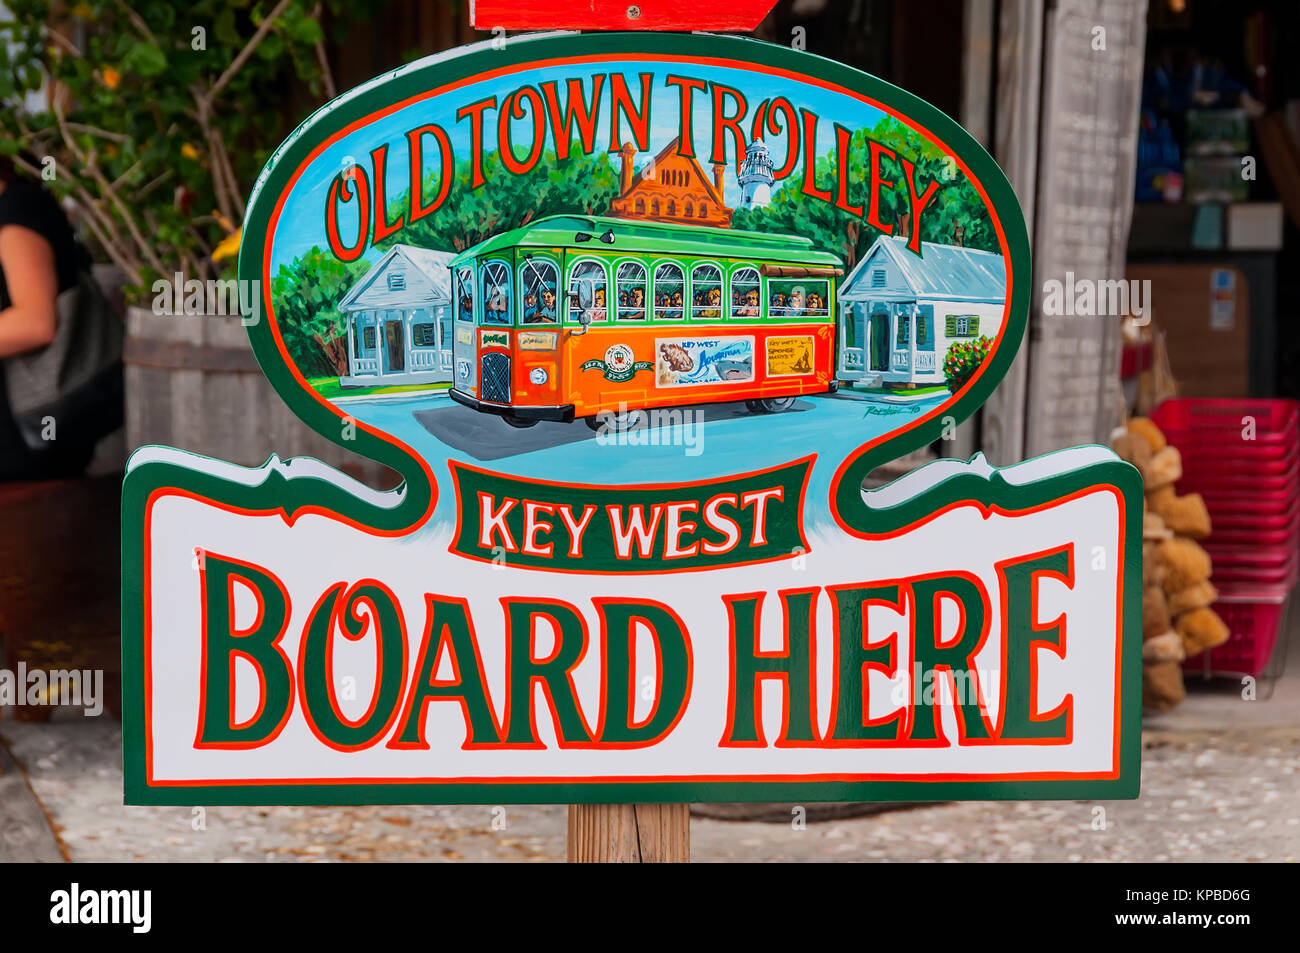 Old Town Trolley Key West Board Here sign for stop on city sightseeing tour, Key West, Florida Stock Photo